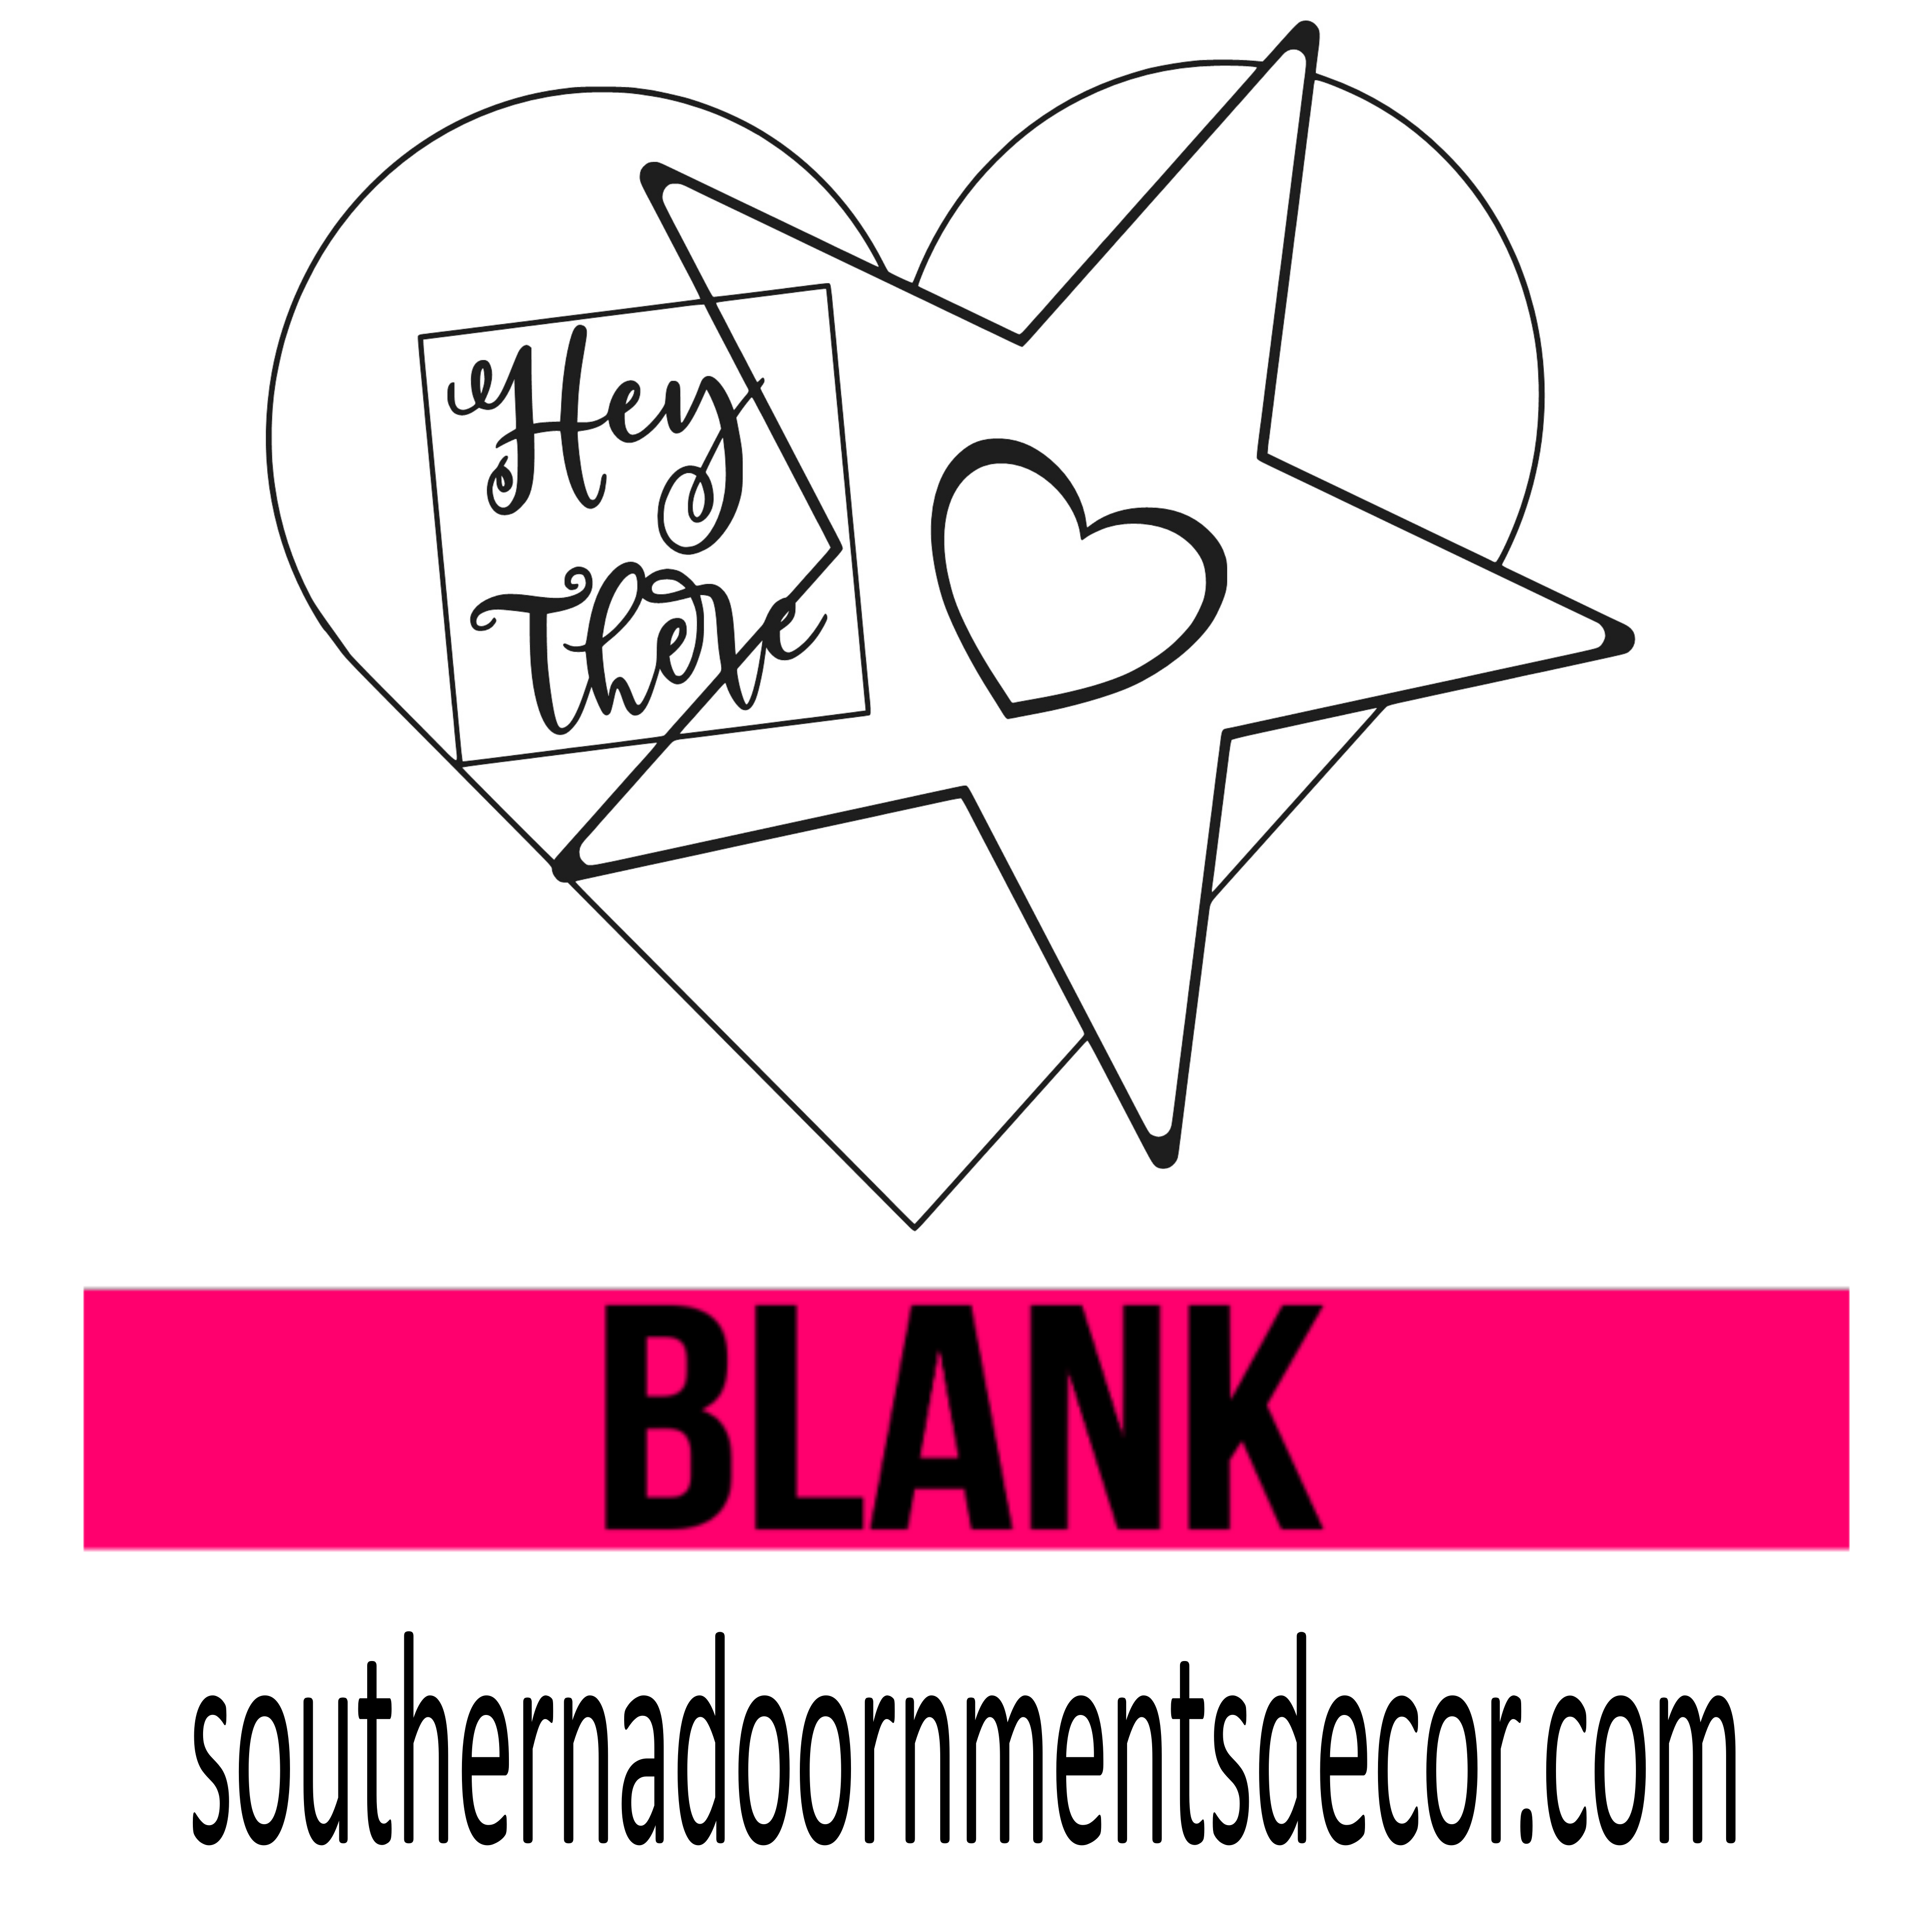 Hey There with star and heart BLANK